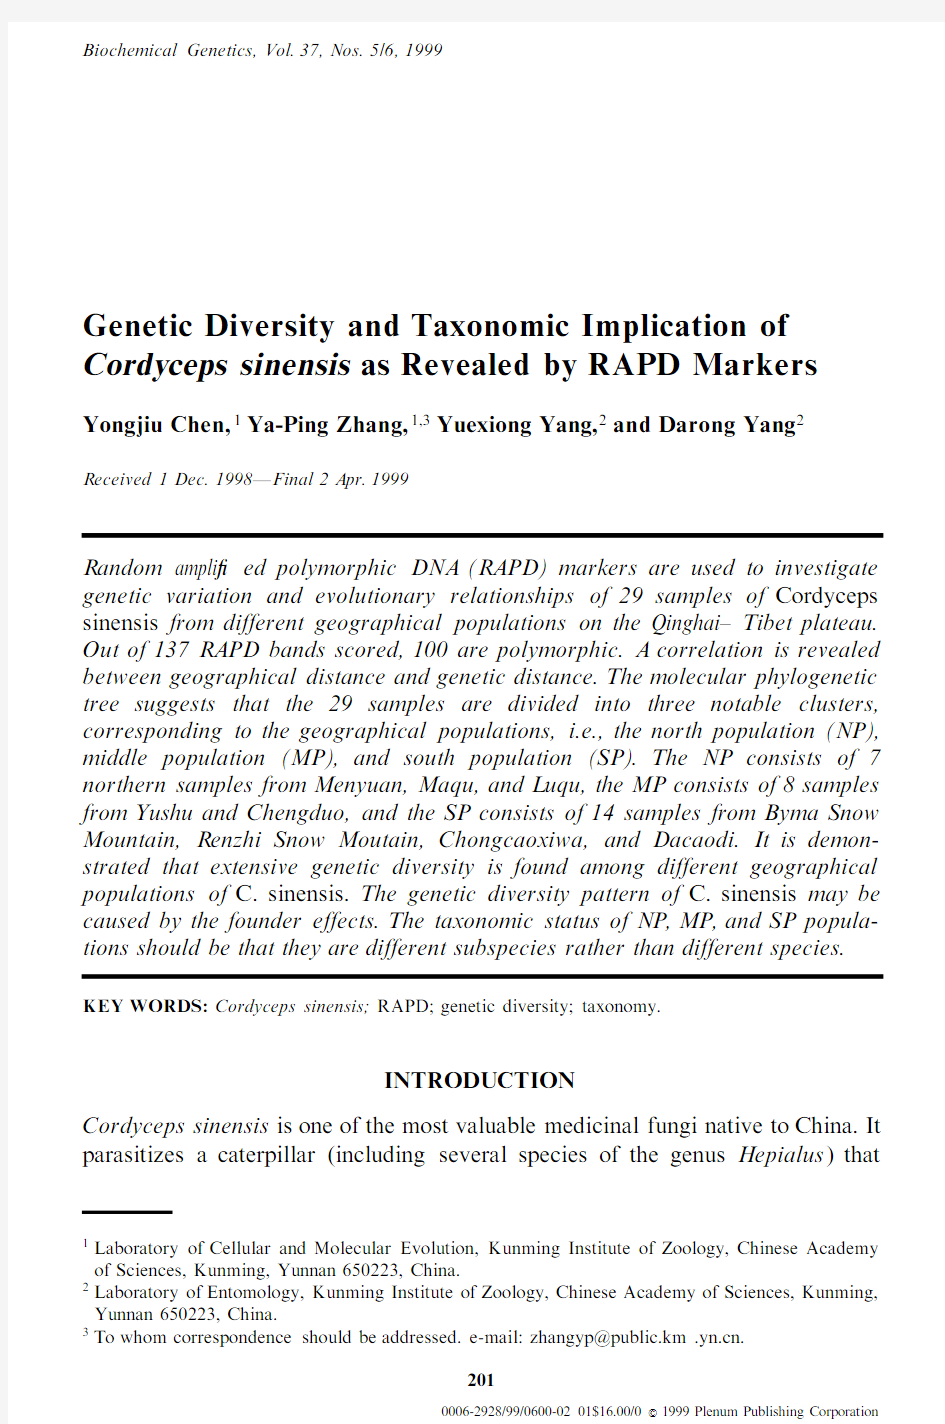 Genetic Diversity and Taxonomic Implication of